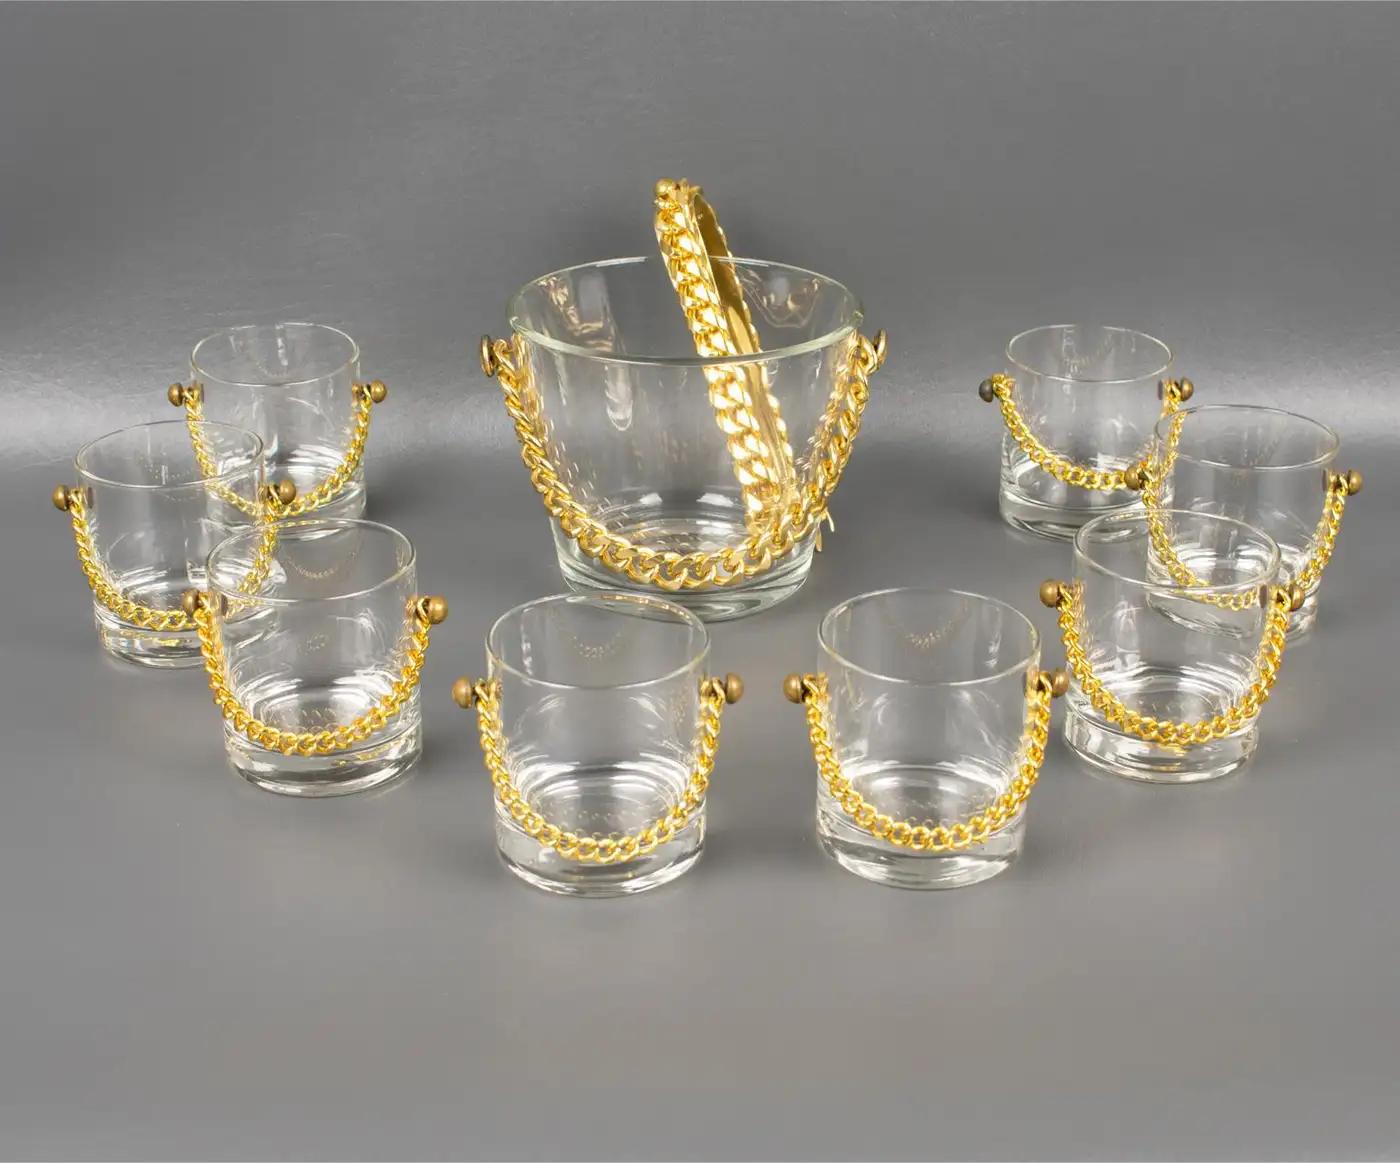 This stunning modern barware cocktail set features an ice bucket with eight matching whiskey glasses and dates from the 1980s. The incredible chic shape boasts a gilded metal chain decor on each piece. The ice bucket has a glass body with a gilded